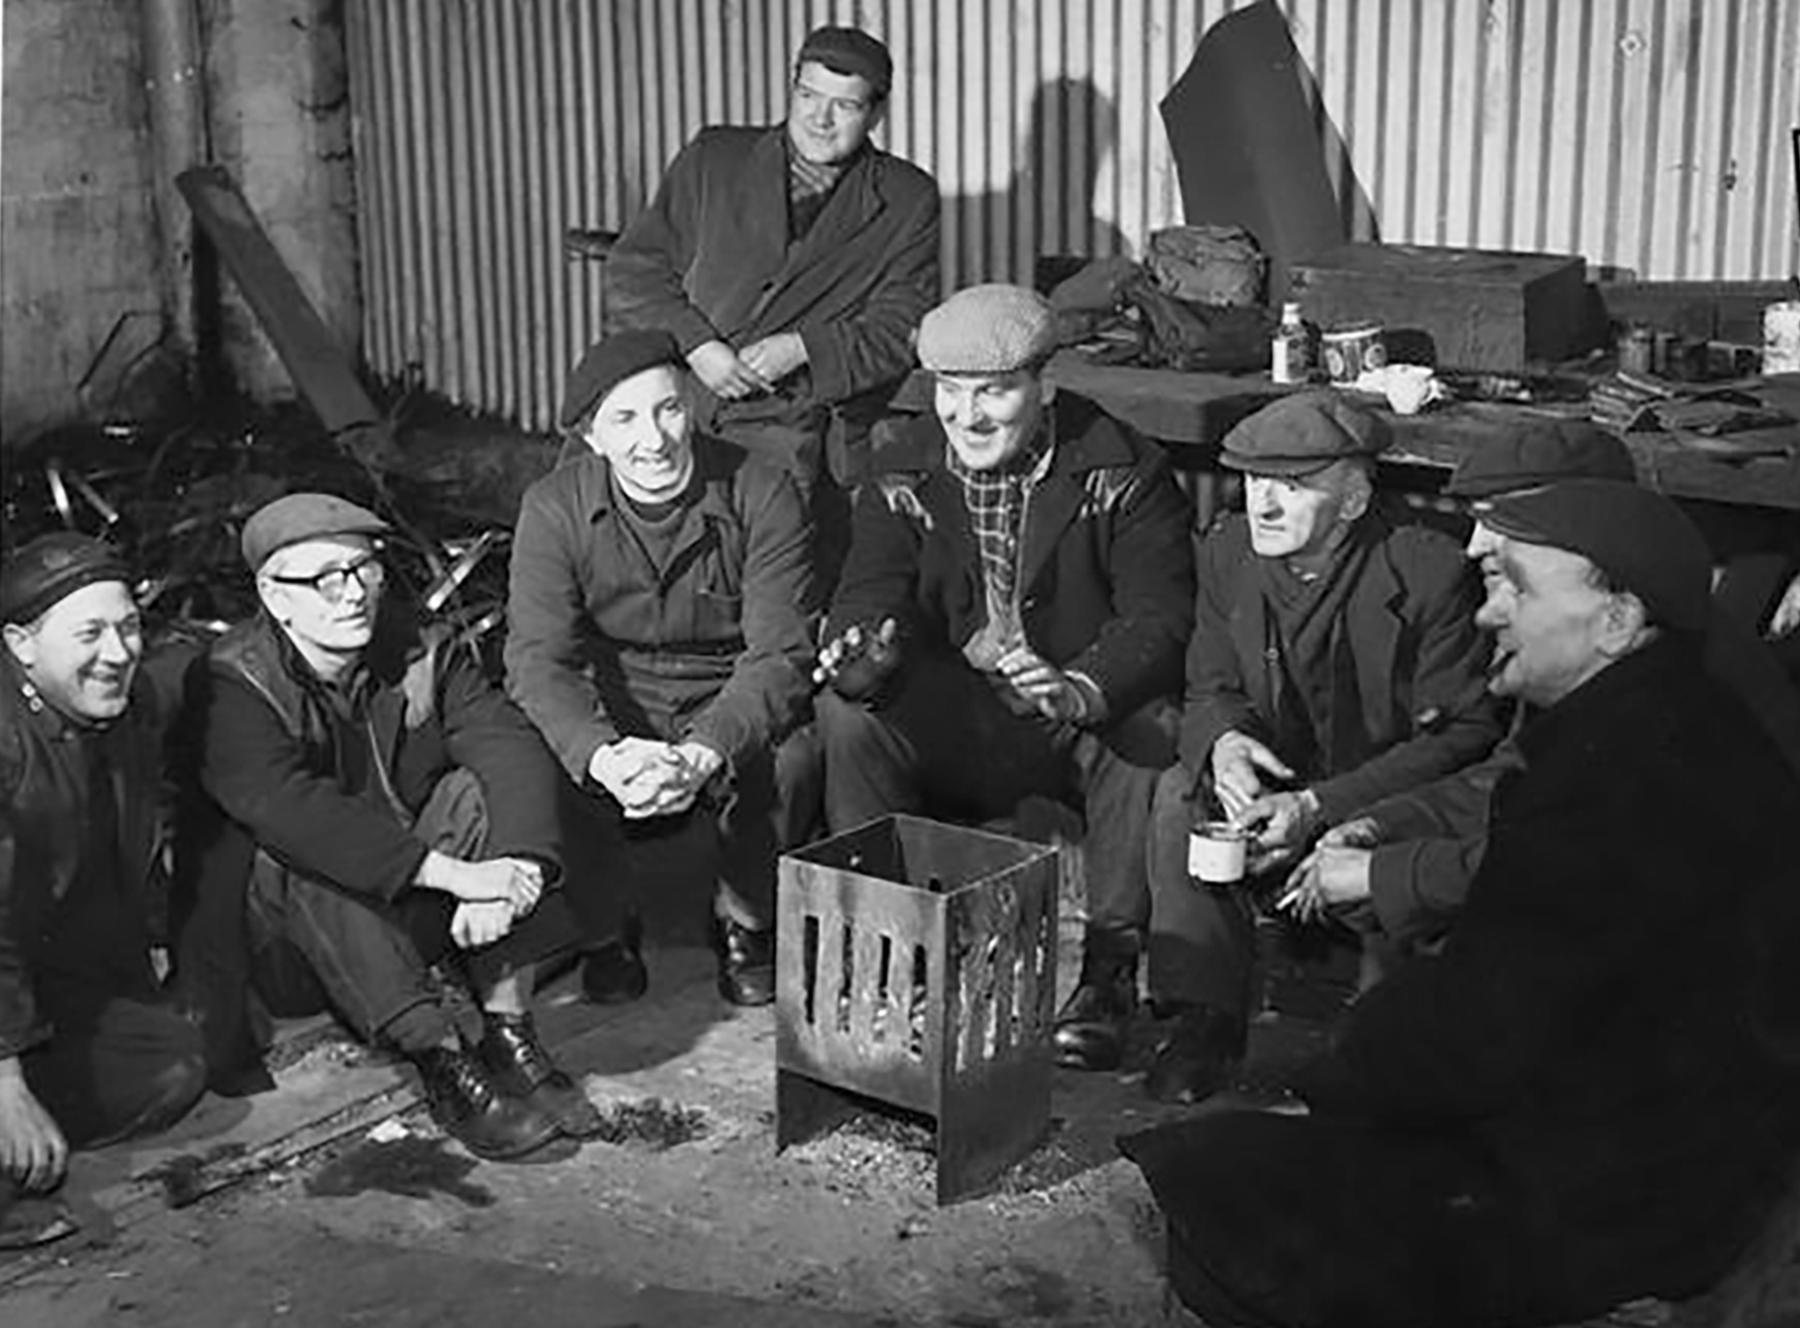 Shipyard workers at Port Glasgow, Scotland, are joined during their lunch break by the Rev. J. Cameron Wallace, a Church of Scotland chaplain, 1965. [Pearl ID: 151434]